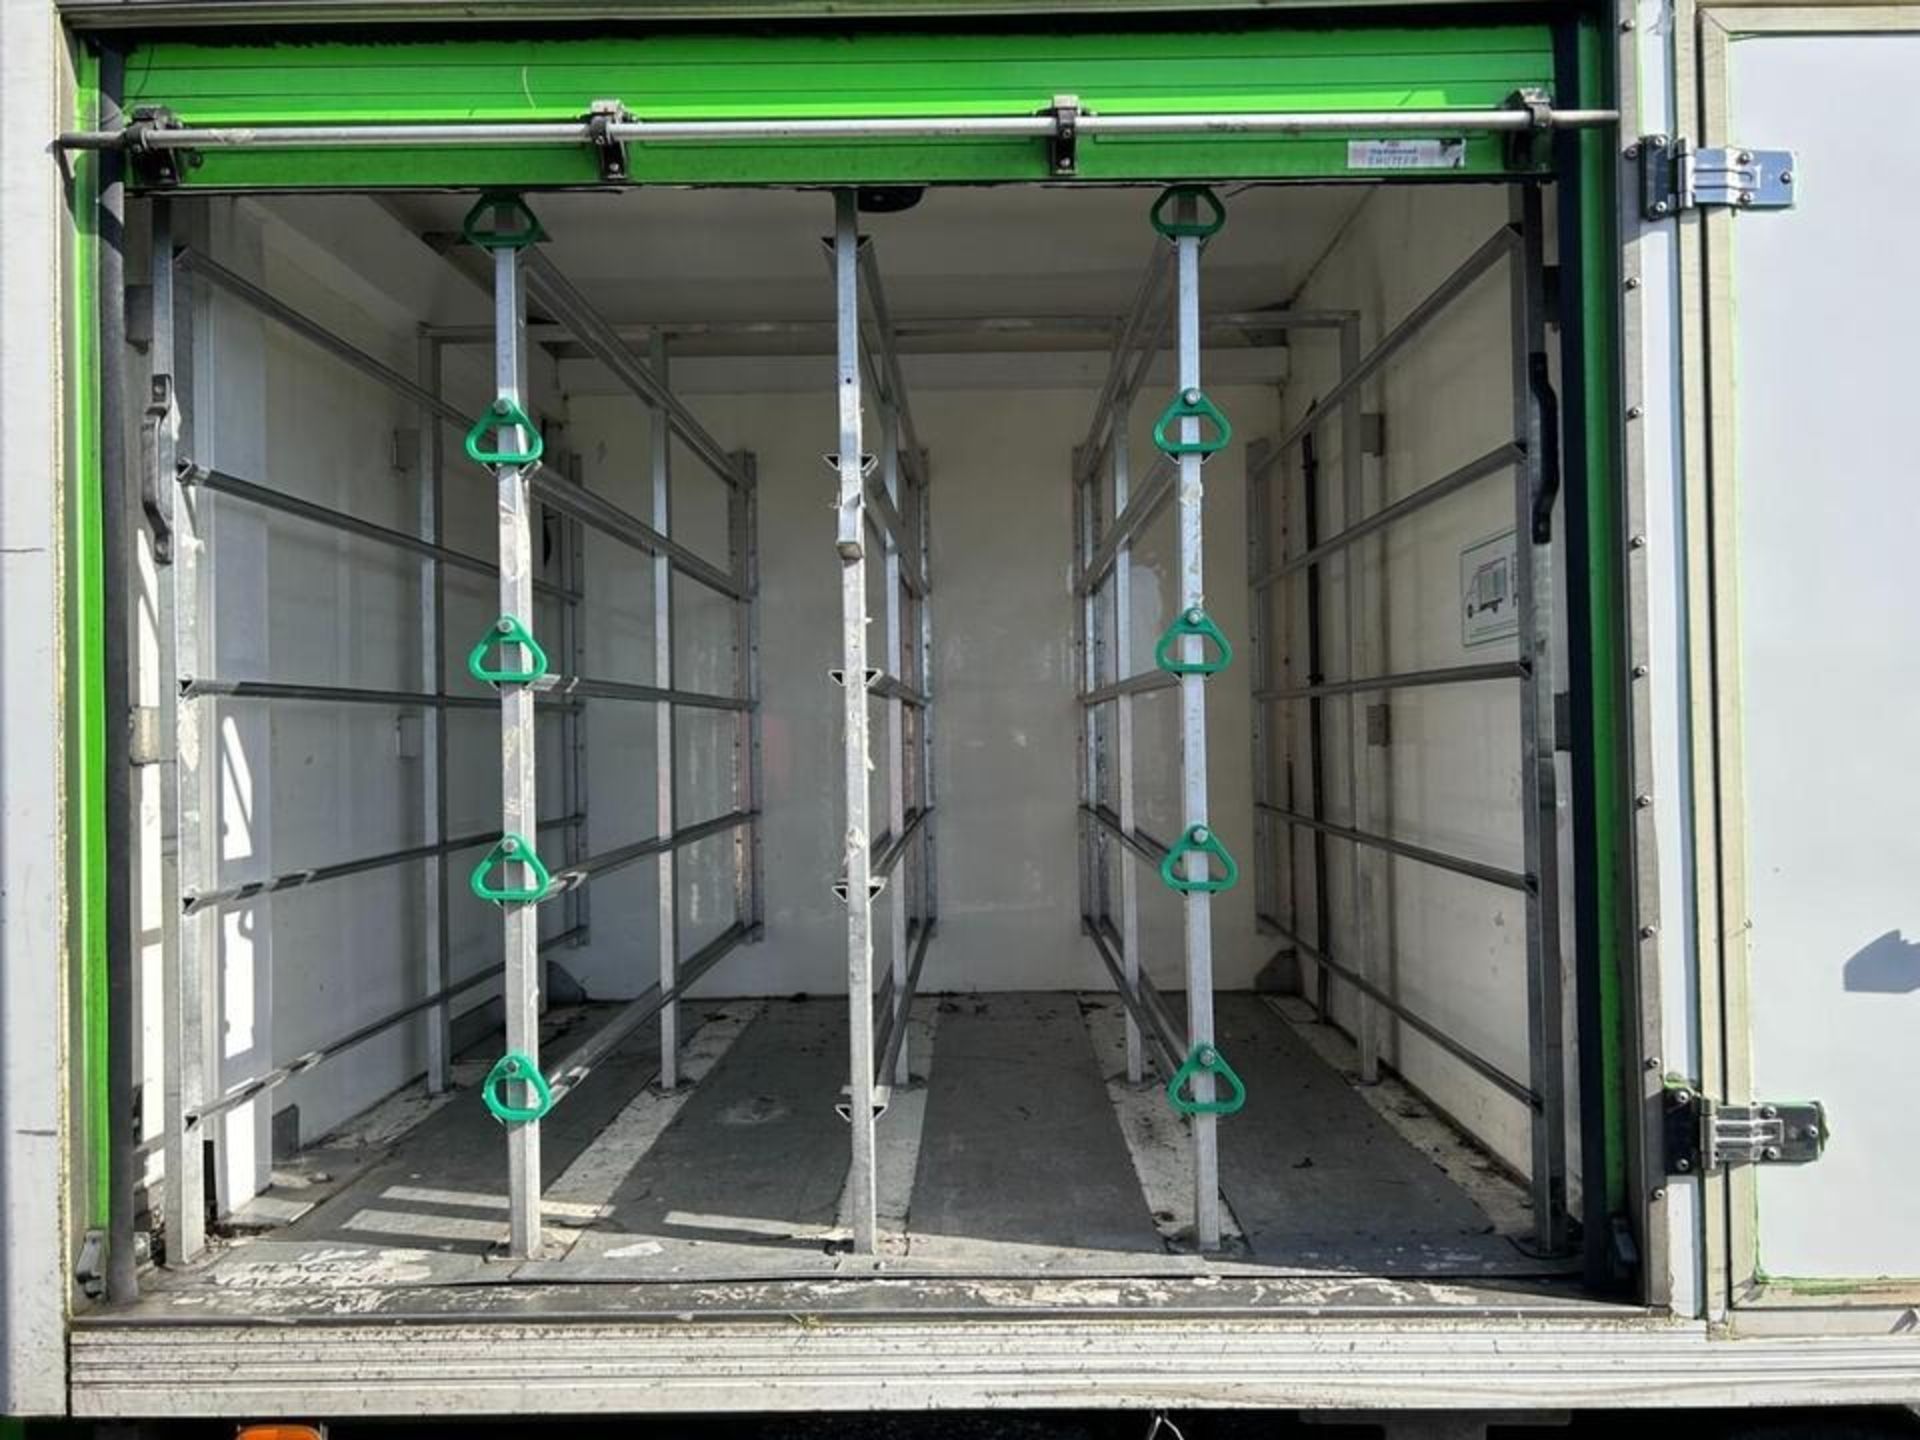 >>>SPECIAL CLEARANCE<<< 2018 MERCEDES-BENZ SPRINTER 314 CDI FRIDGE FREEZER CHASSIS CAB - Image 8 of 15